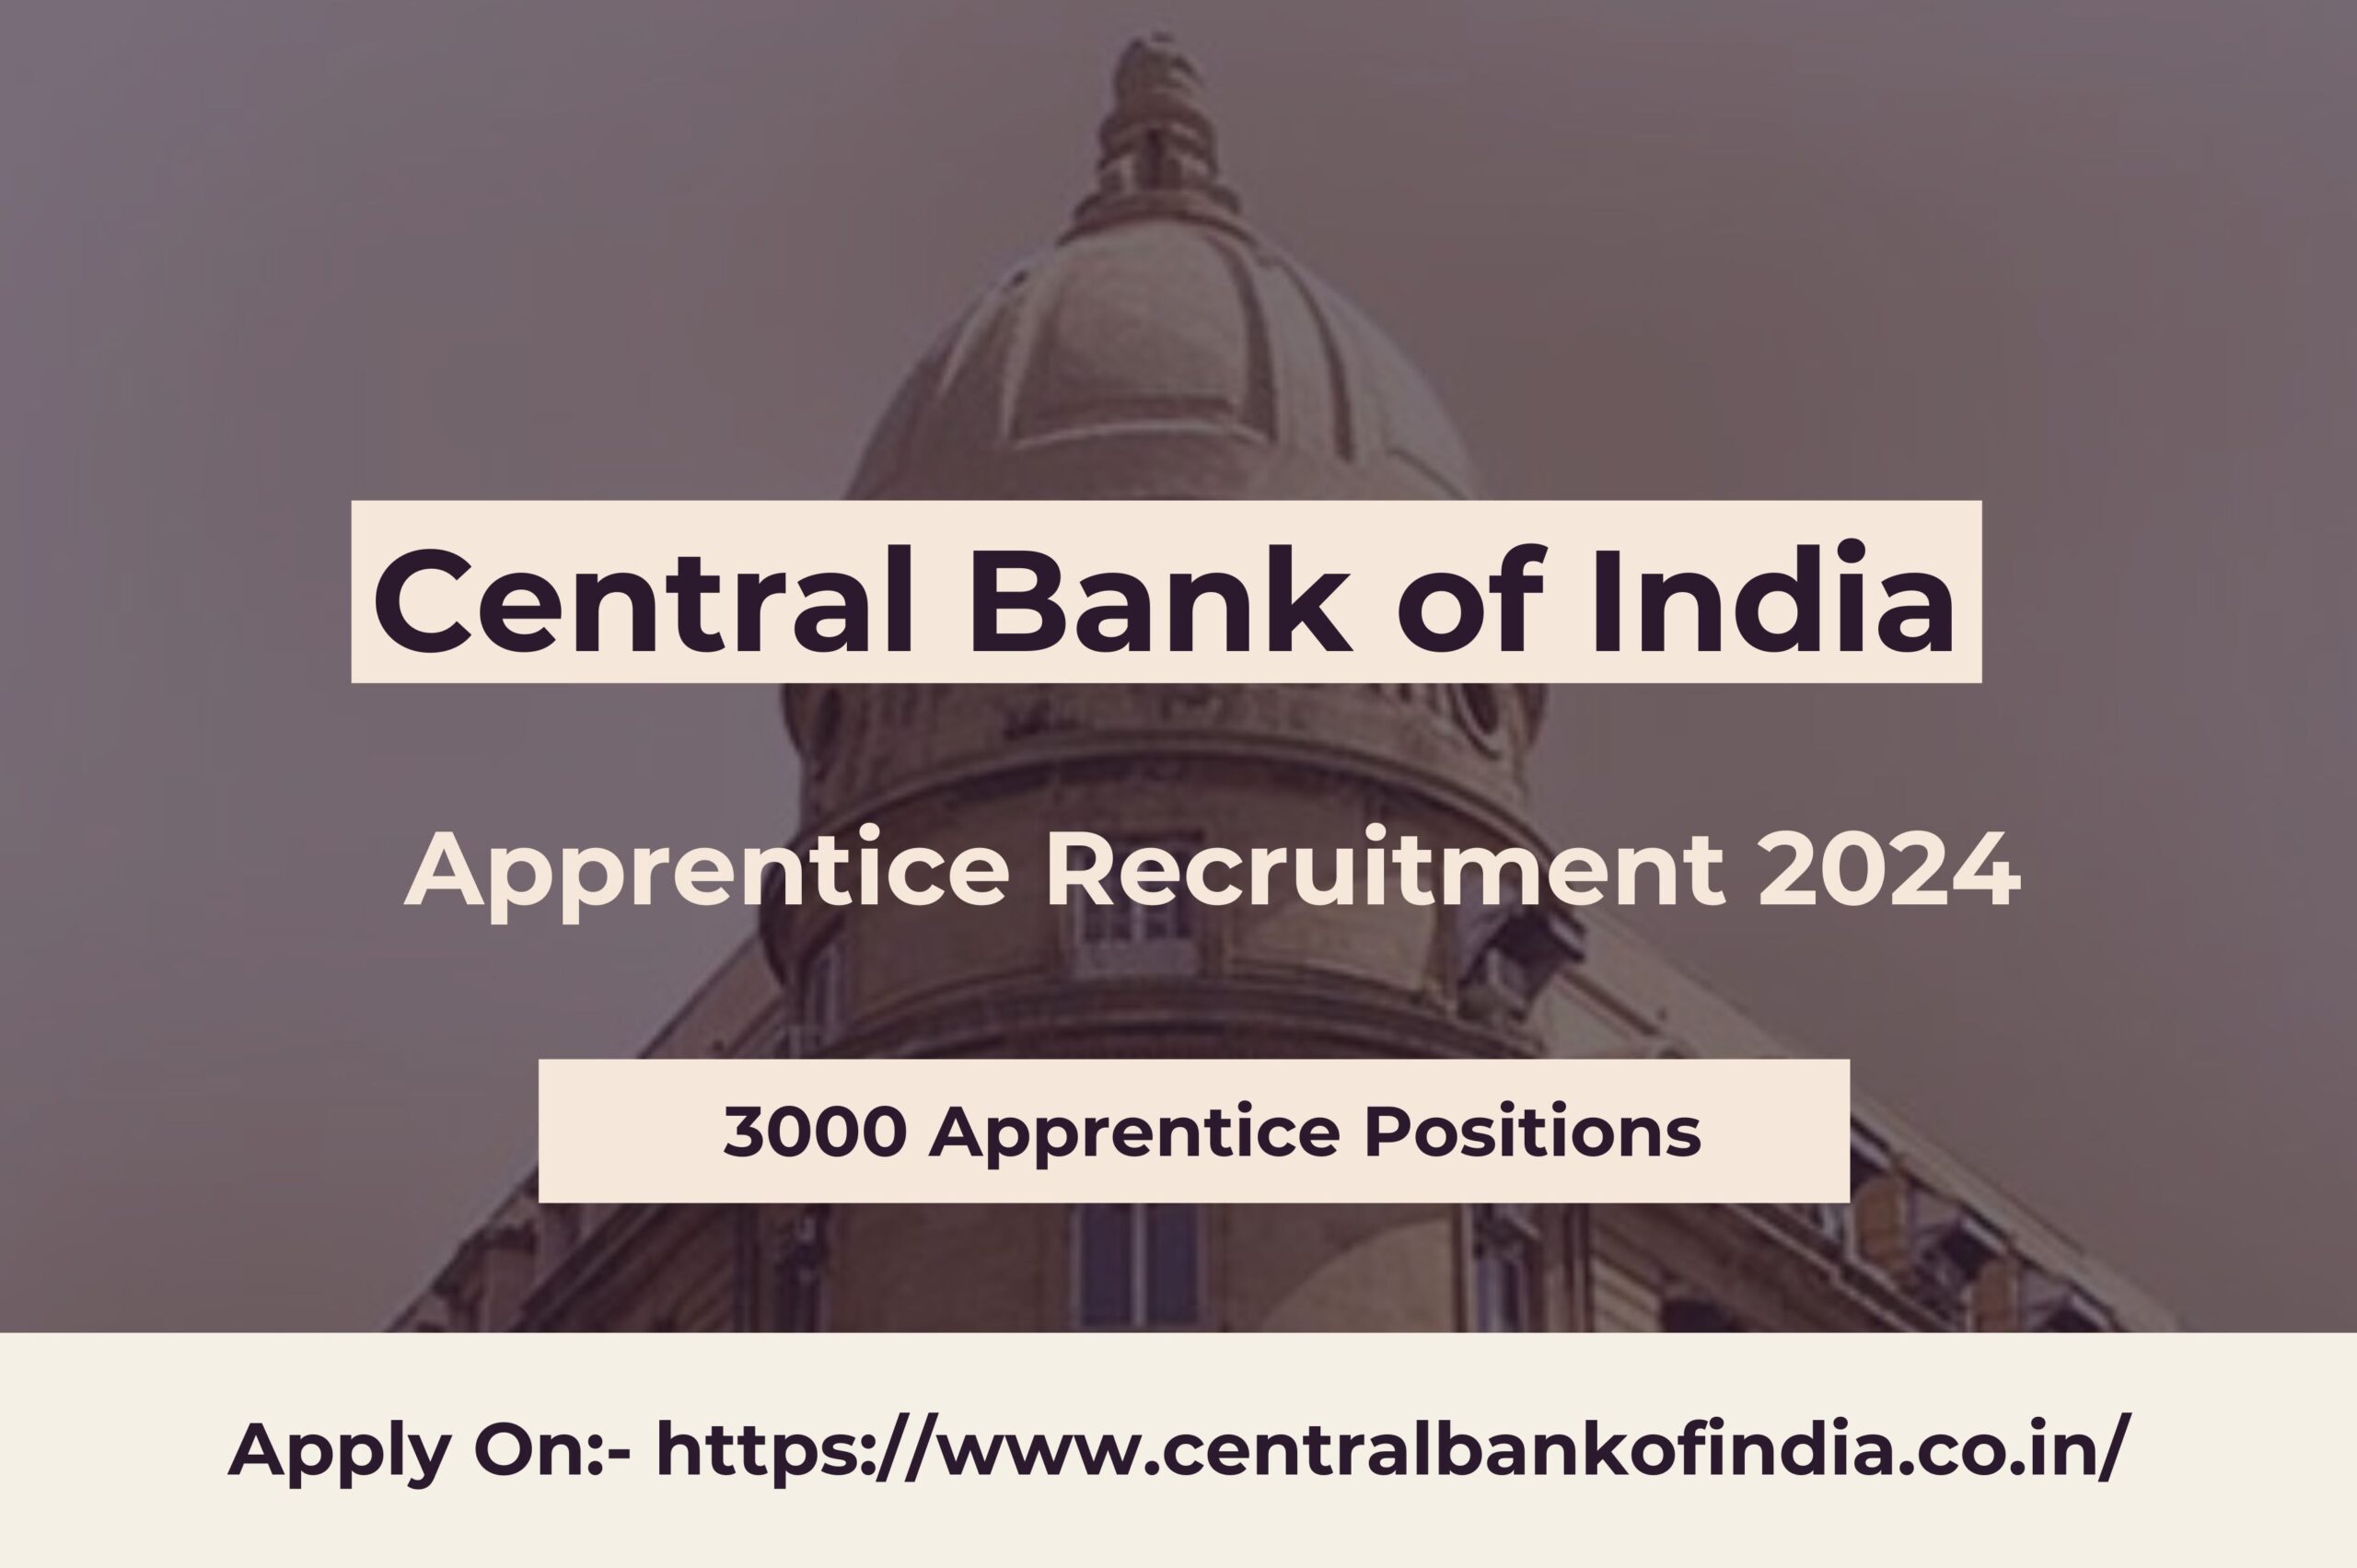 Central Bank of India Apprentice Recruitment 2024: Apply for 3000 Apprentice Positions